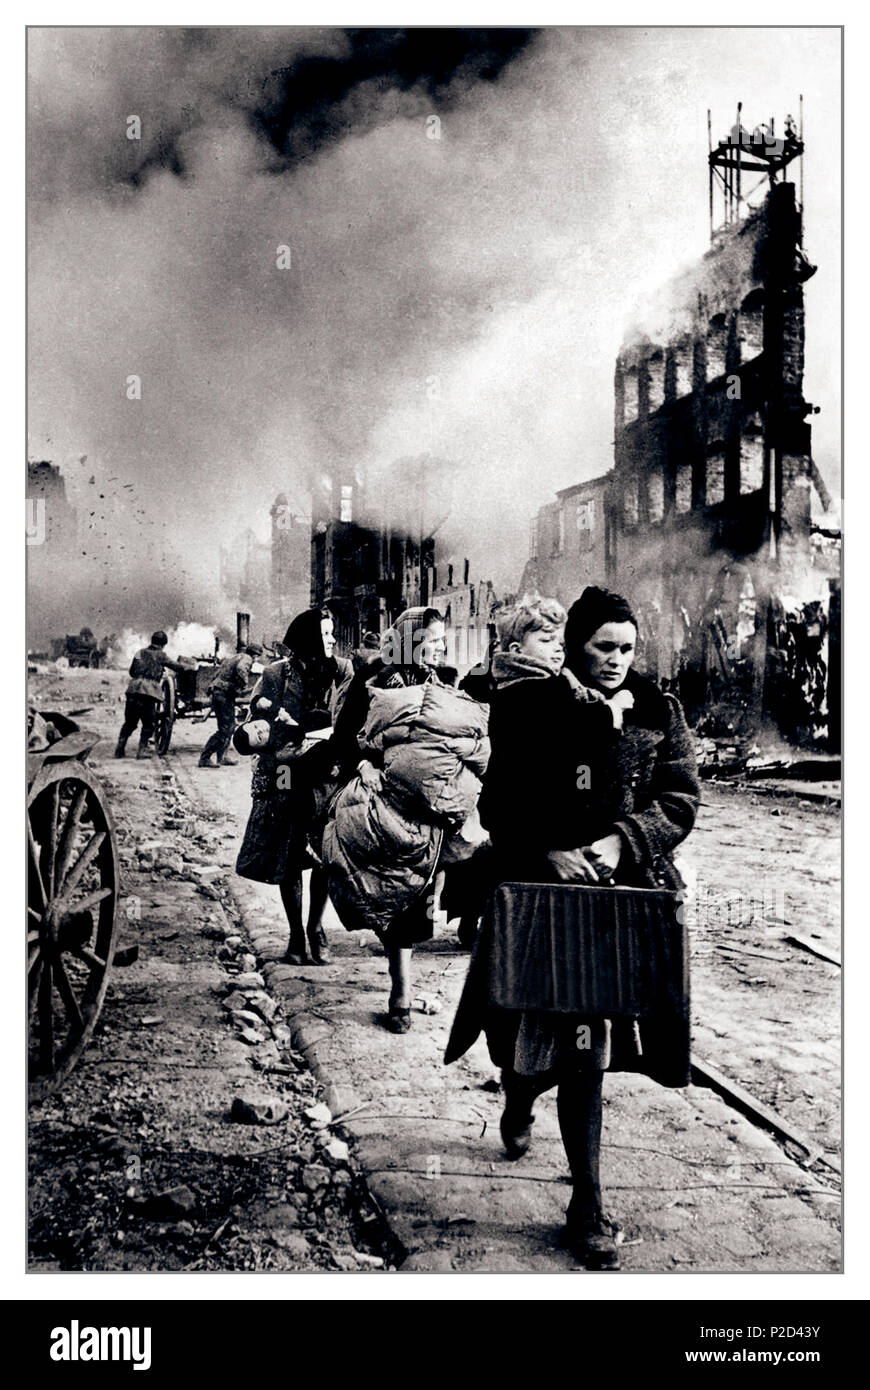 DANZIG 1945 BATTLE WW2 Vintage B&W image of local population fleeing a destroyed Danzig 30th March 1945 According to Soviet claims, in the Battle of Danzig in WW2 the German Army lost 39,000 soldiers dead and 10,000 captured...Second World War World War II Stock Photo